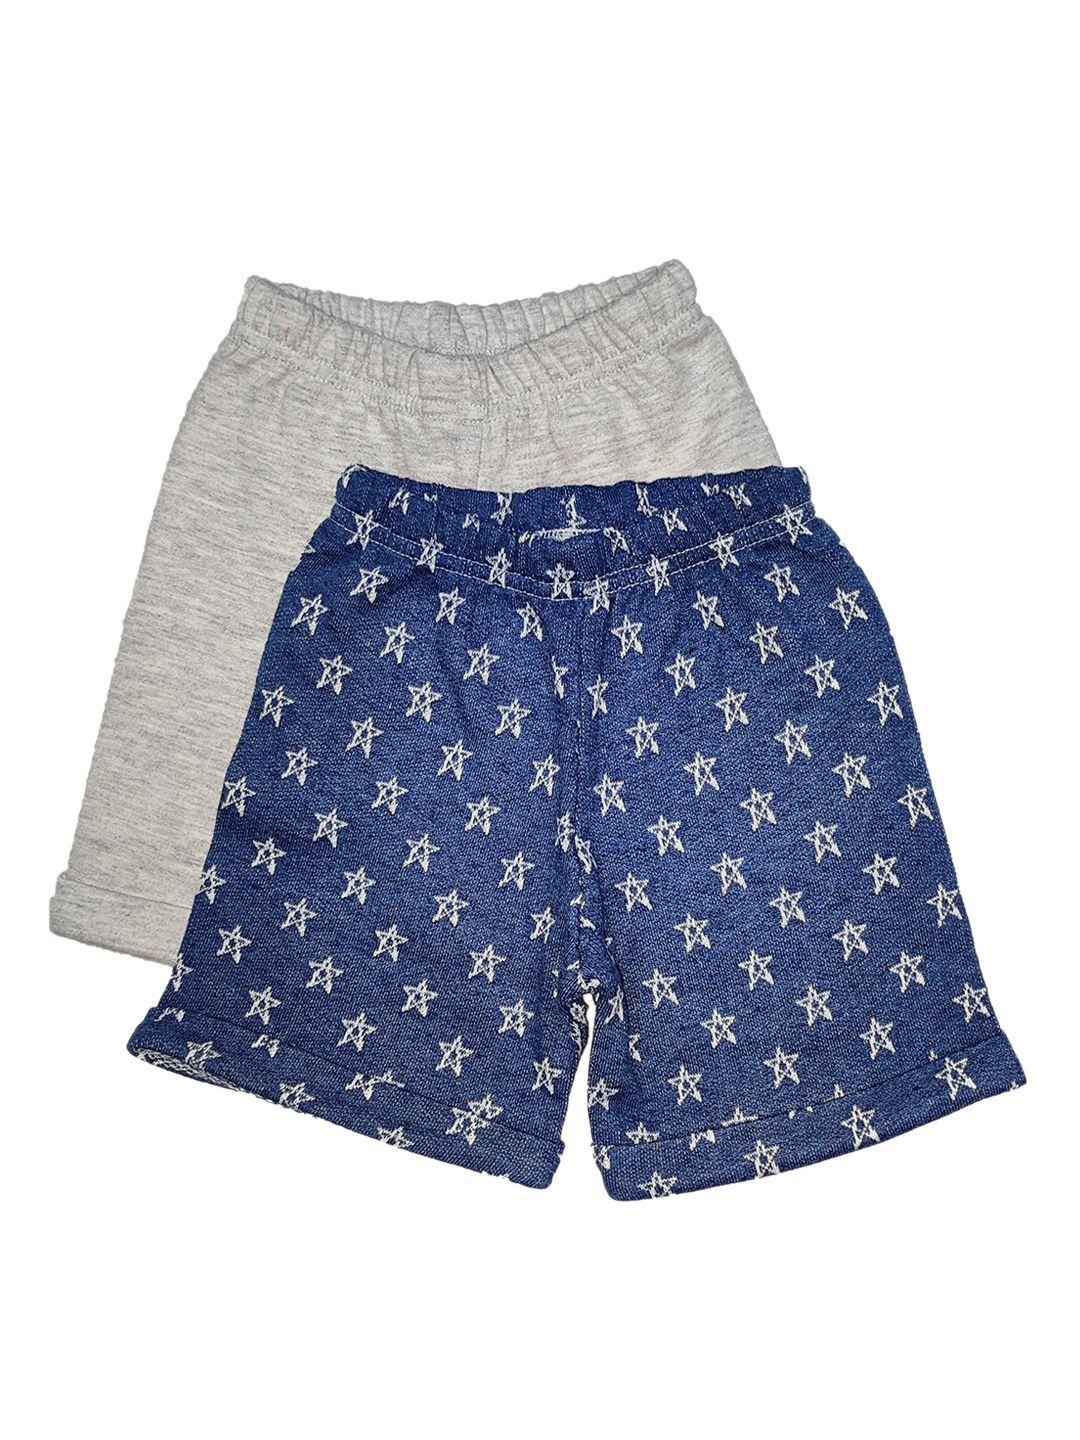 bodycare kids boys pack of 2 blue & grey printed shorts